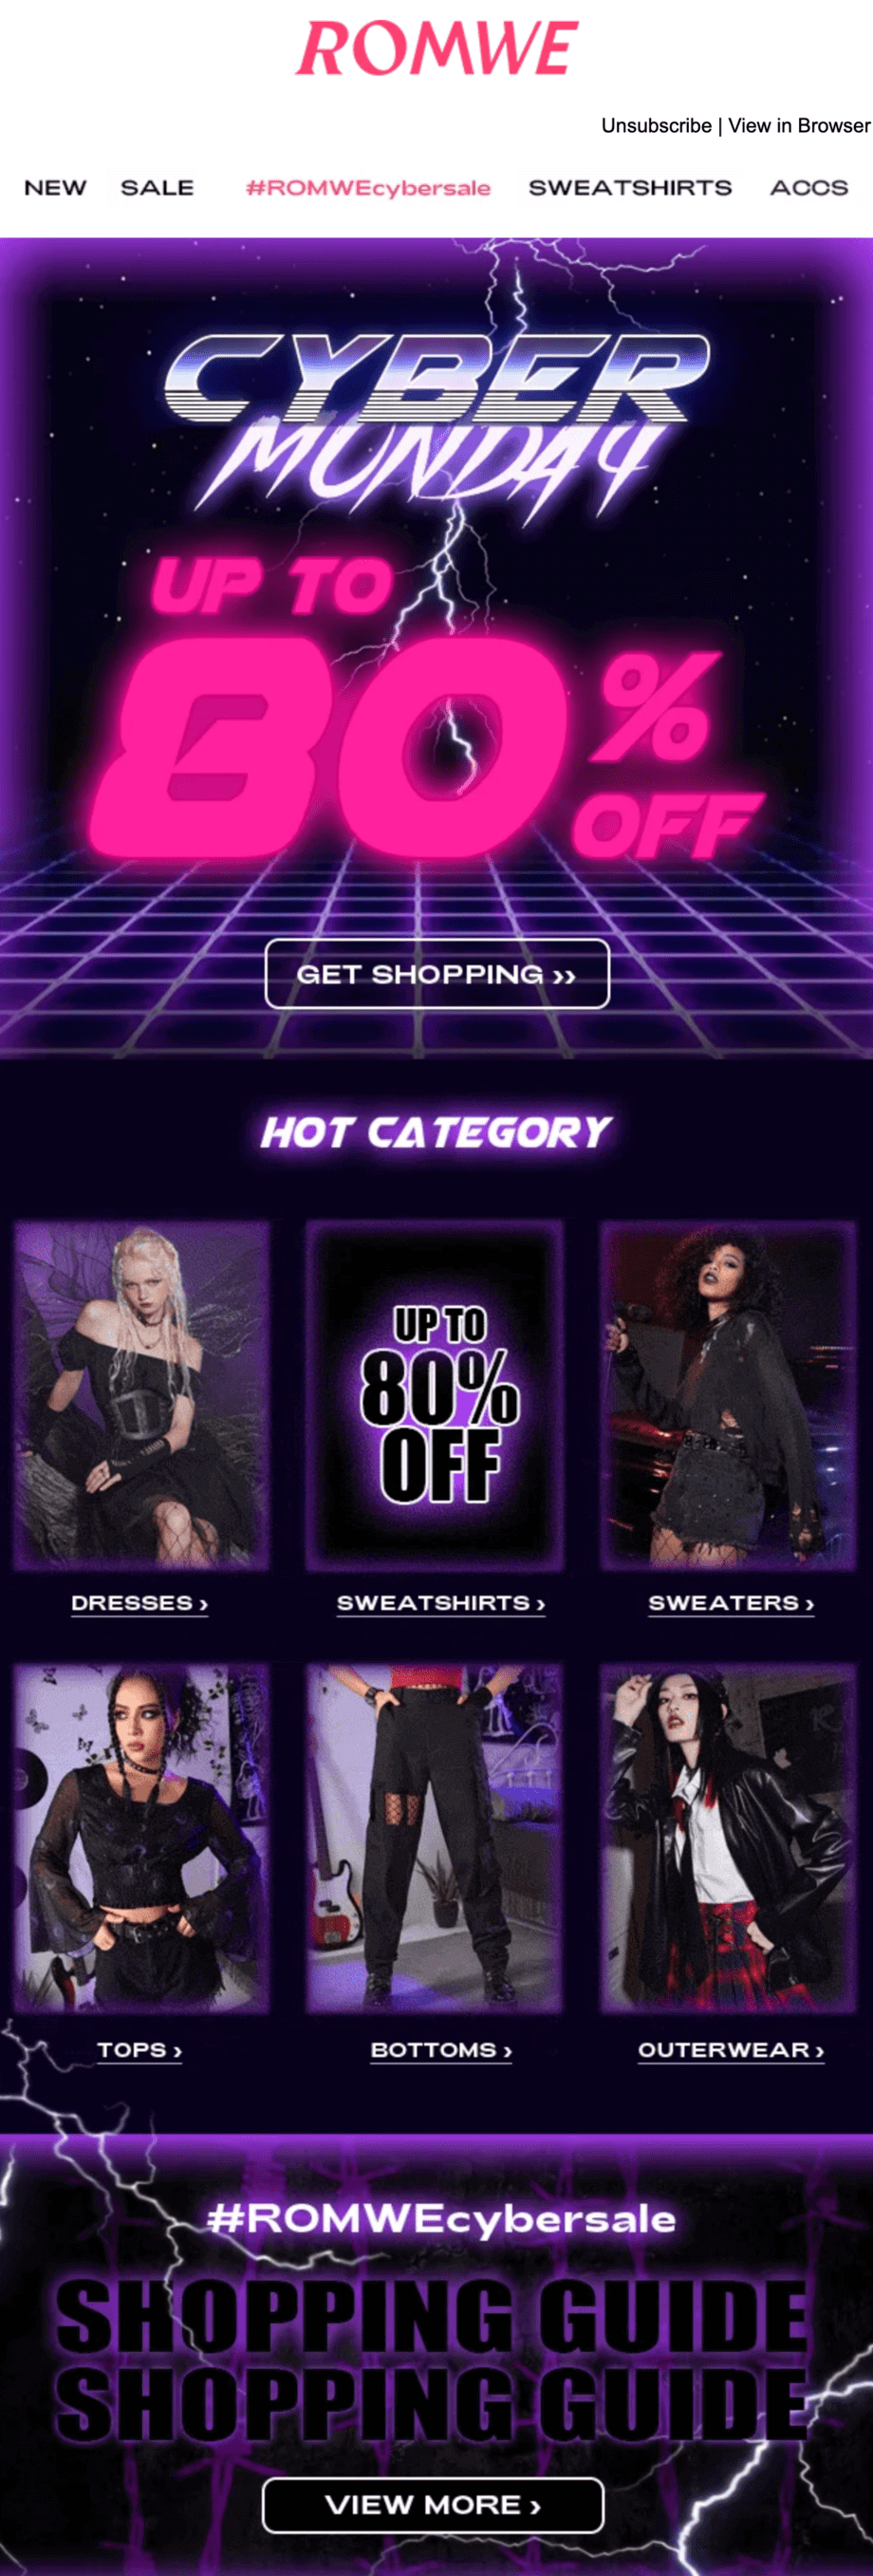 A Cyber Monday email with pink and purple accents and a black background